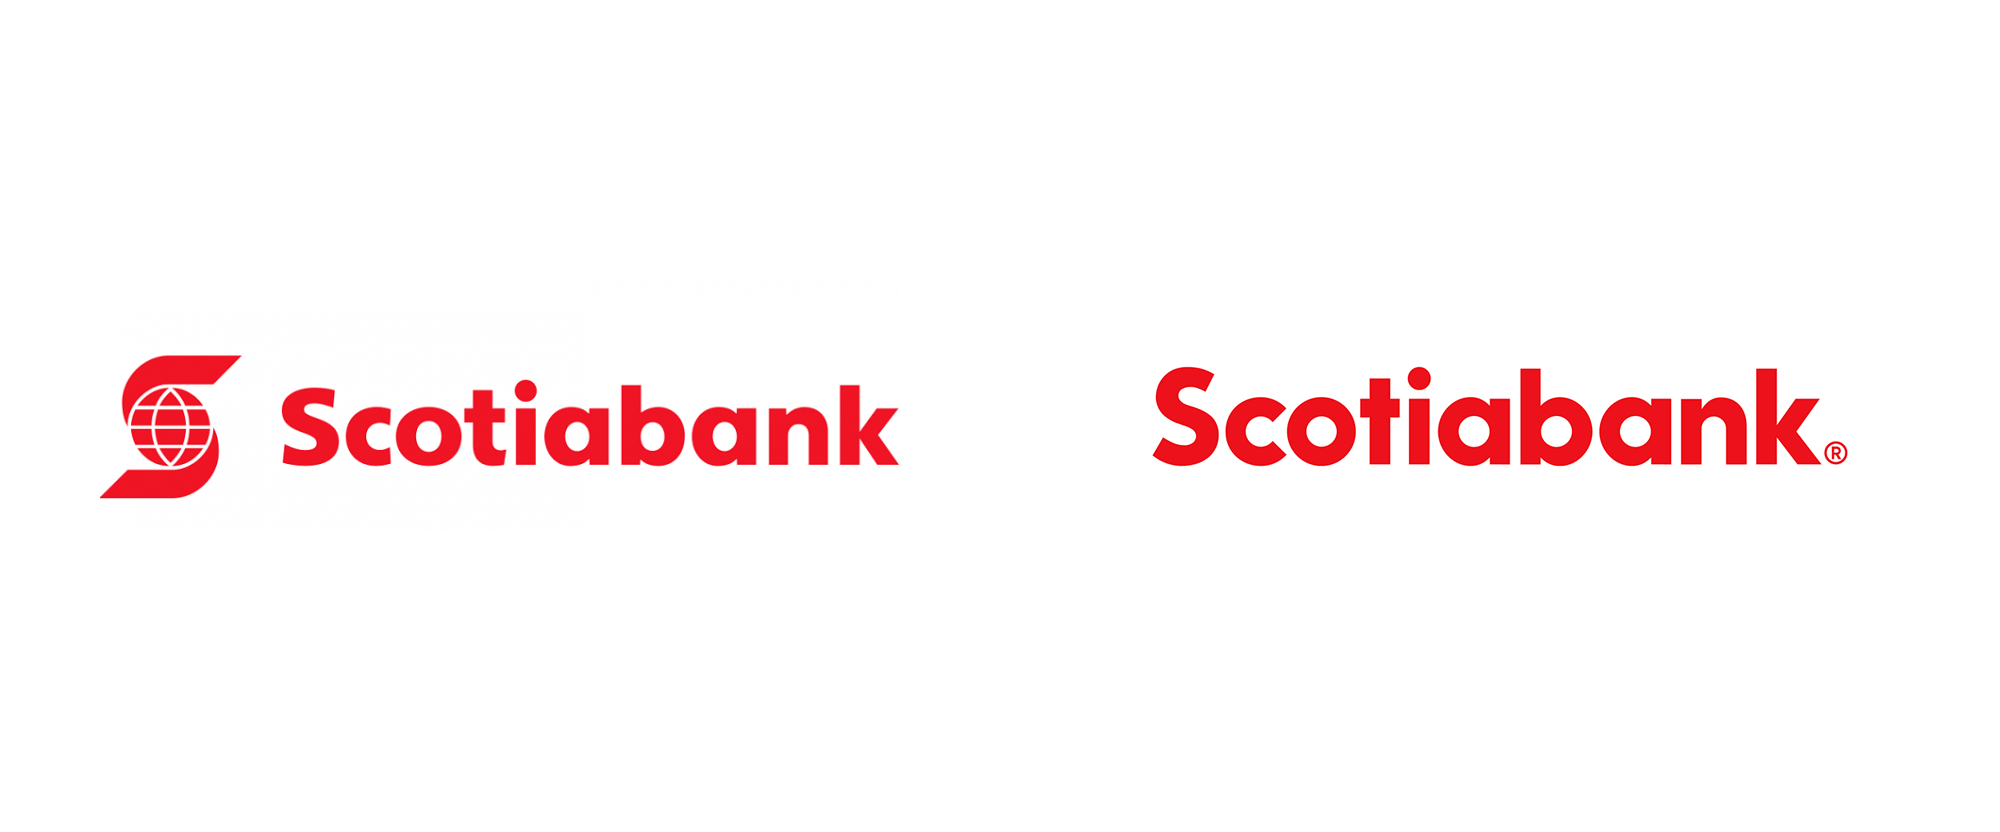 Scotiabank Logo - Brand New: New Logo and Identity for Scotiabank